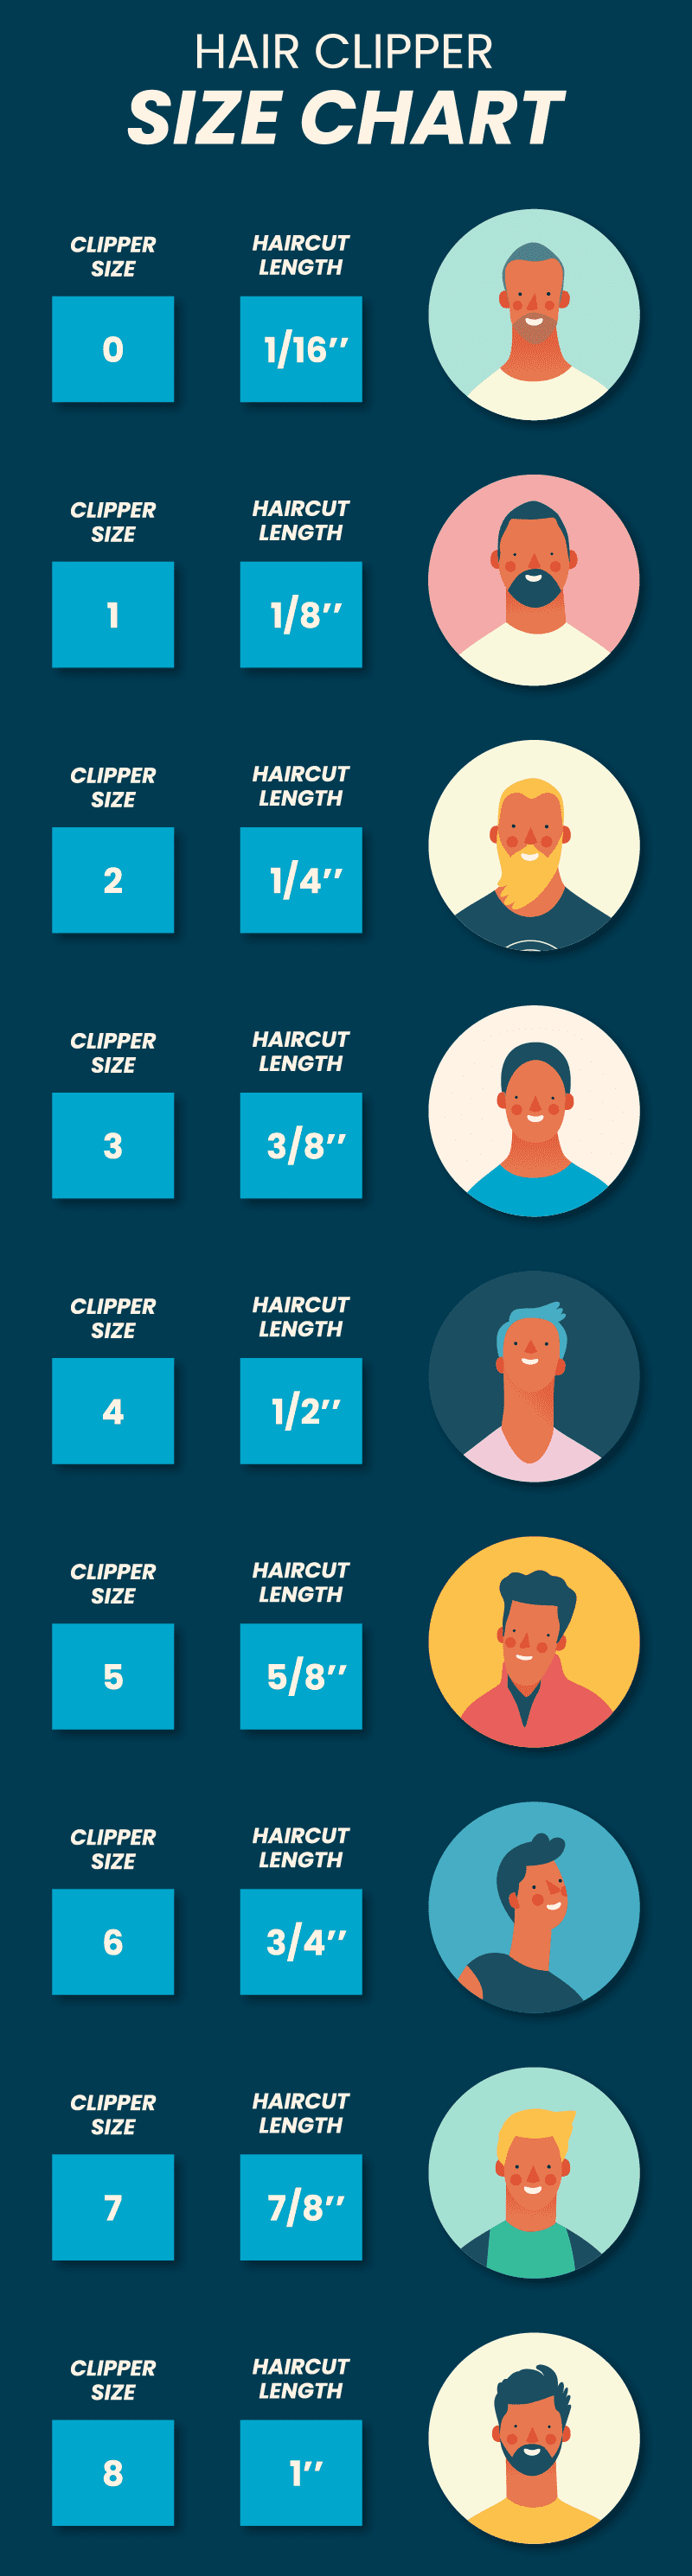 Hair clipper sizes and haircut numbers graphic